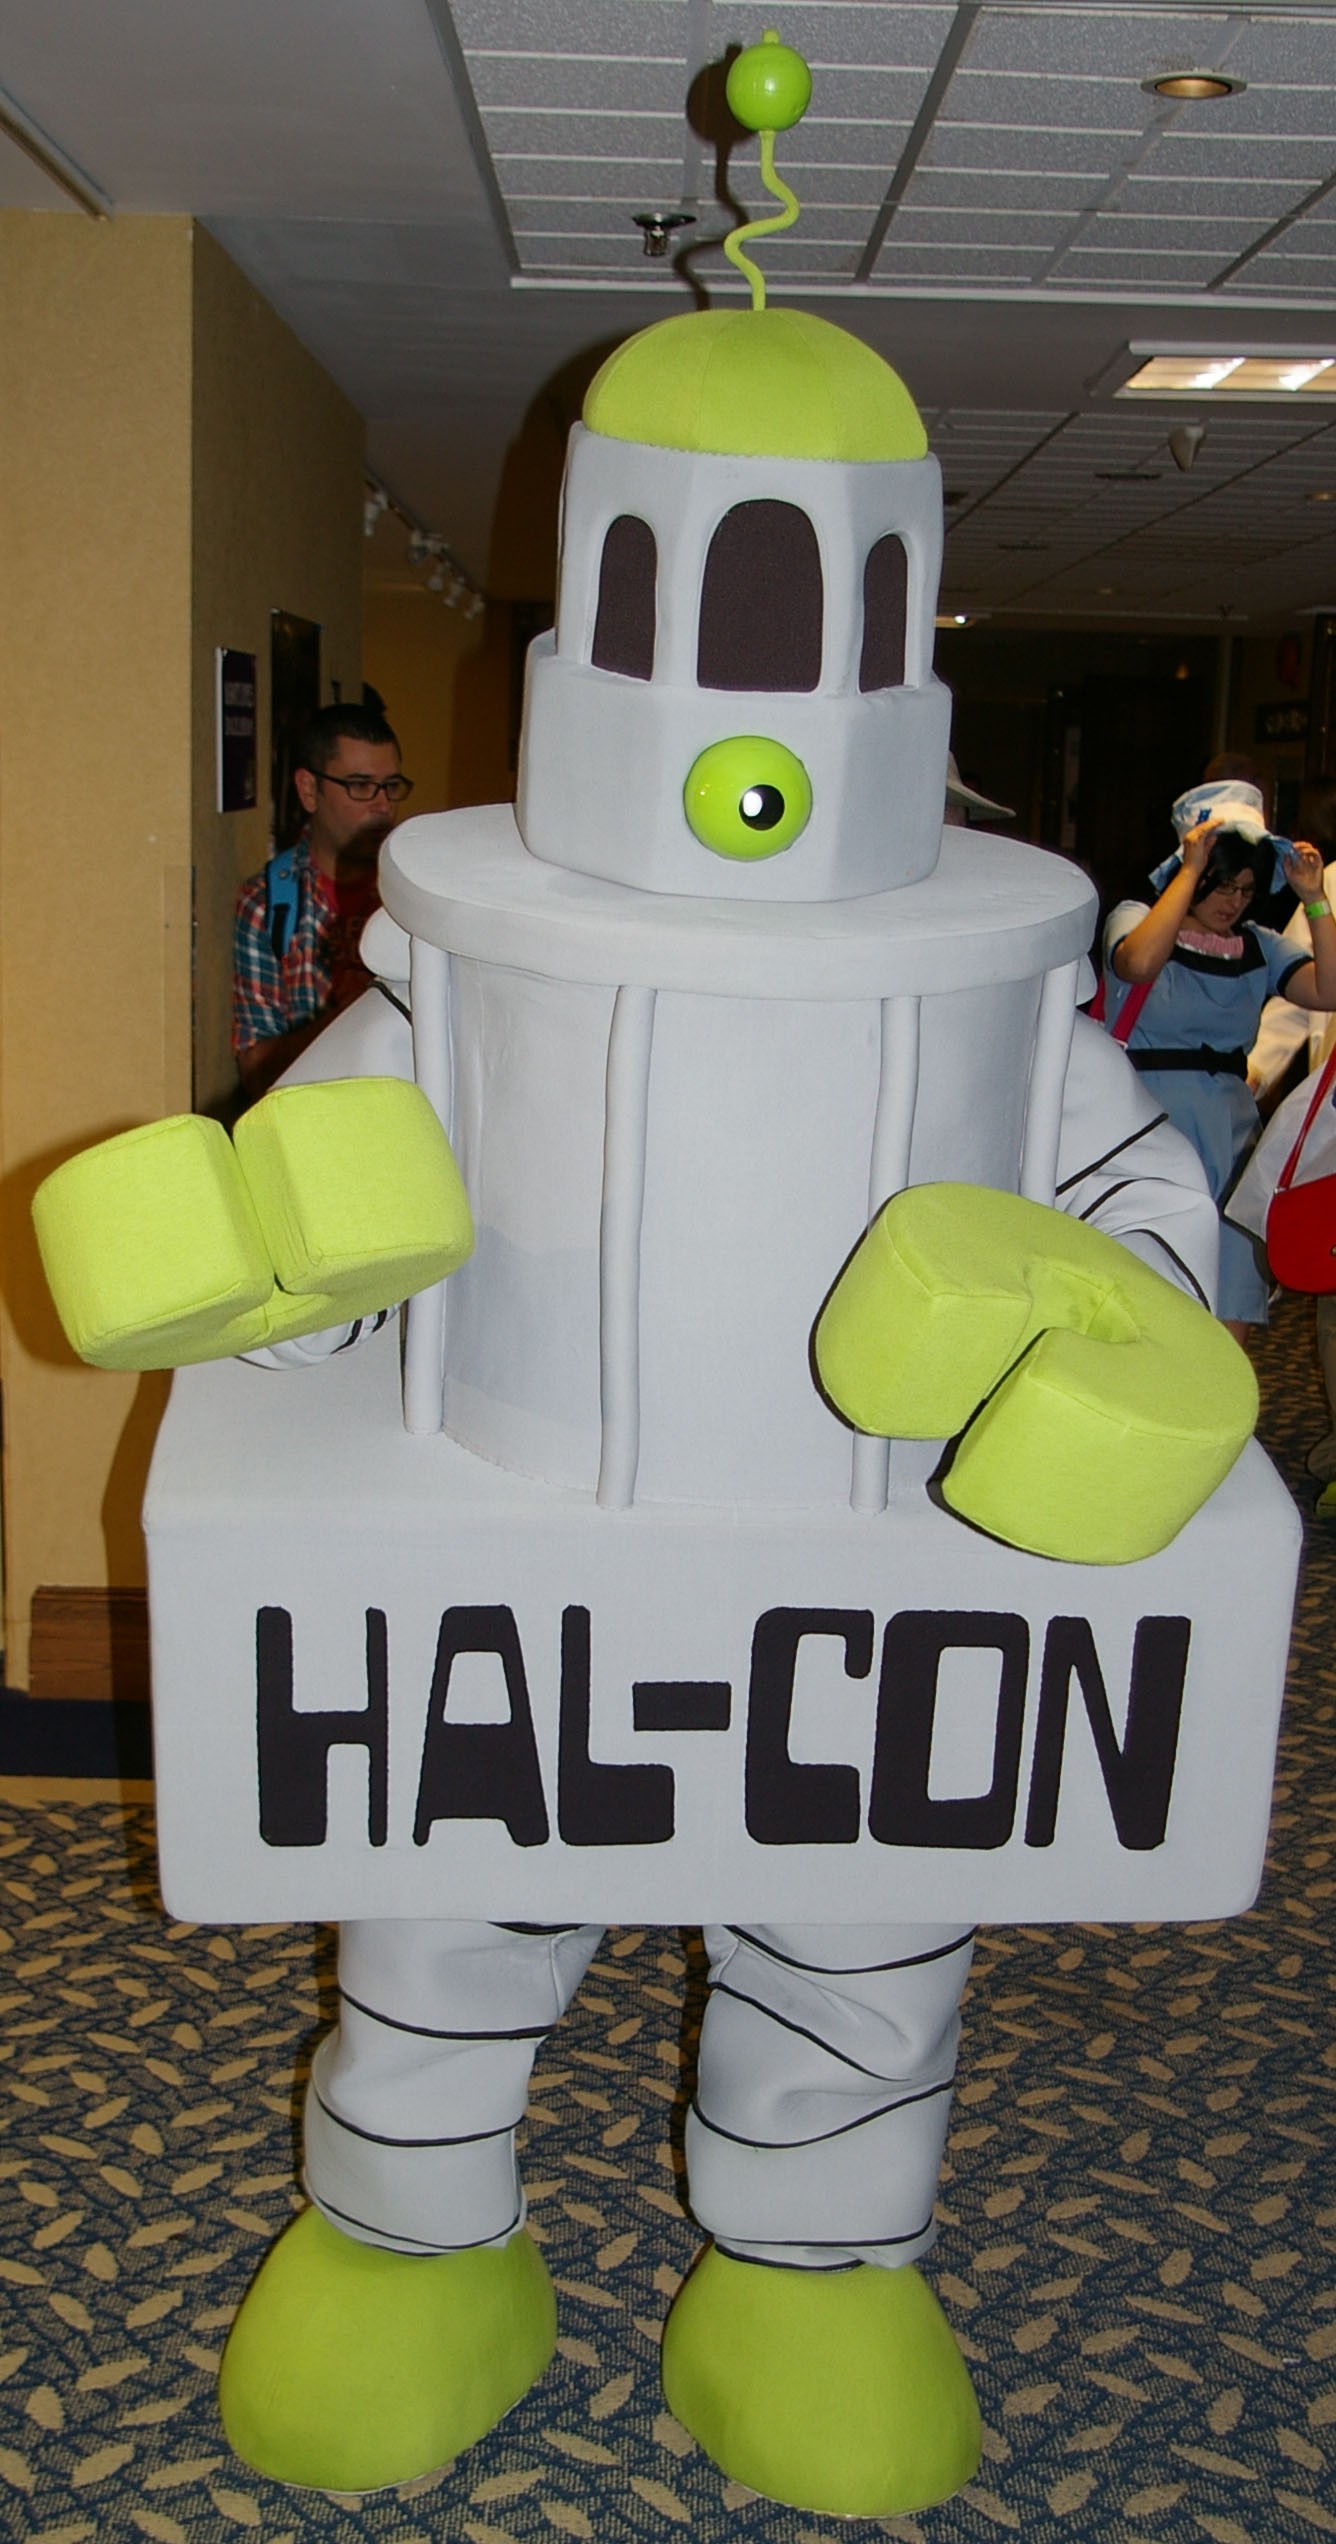 A day at Hal-Con